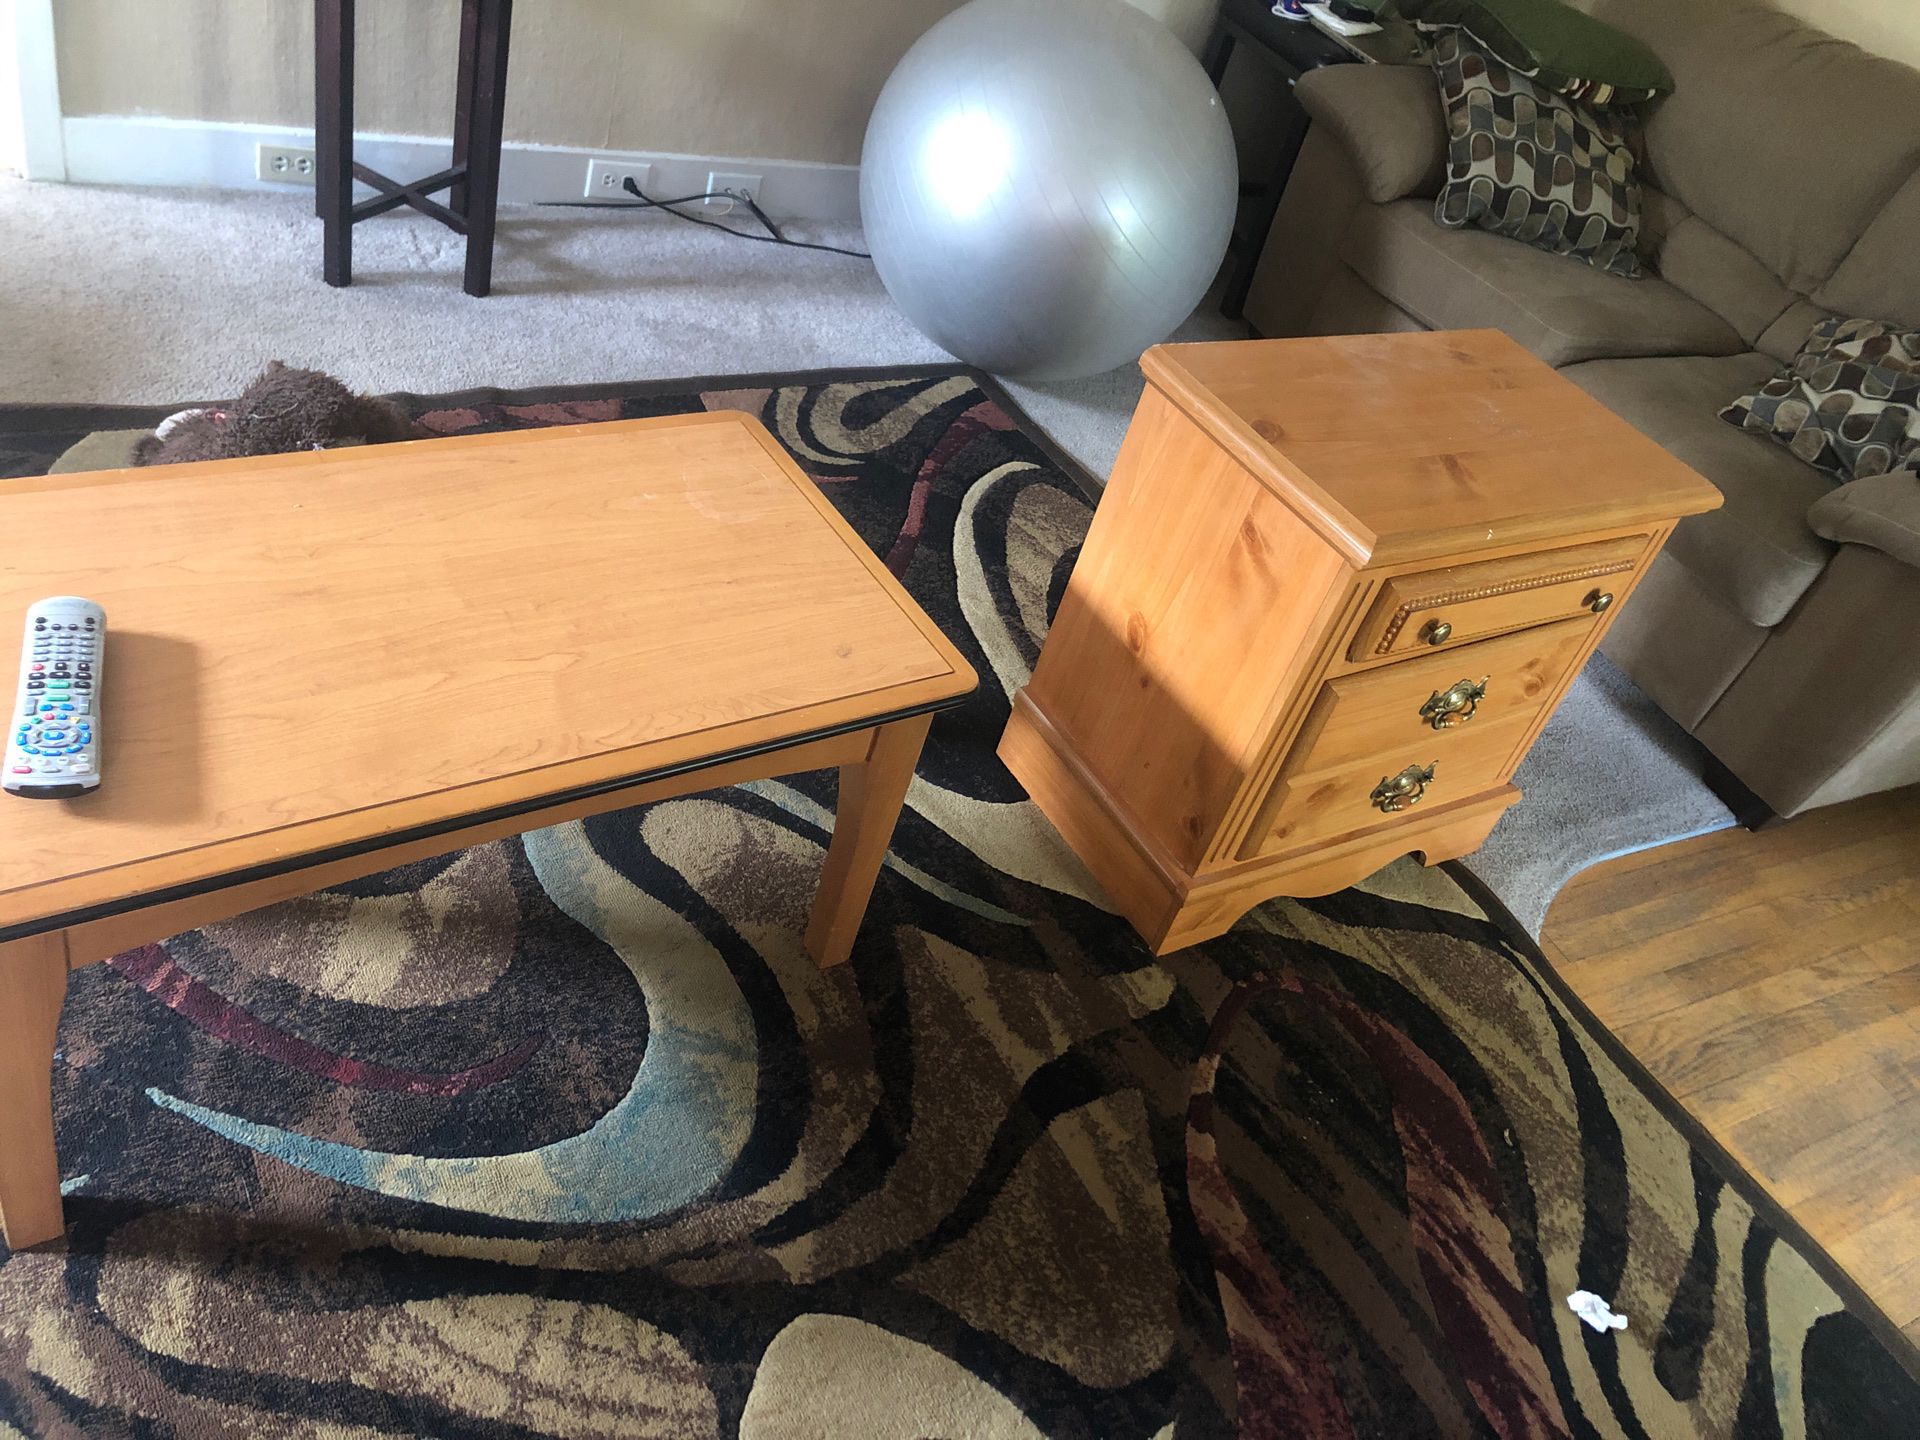 Center table and night stand - sturdy